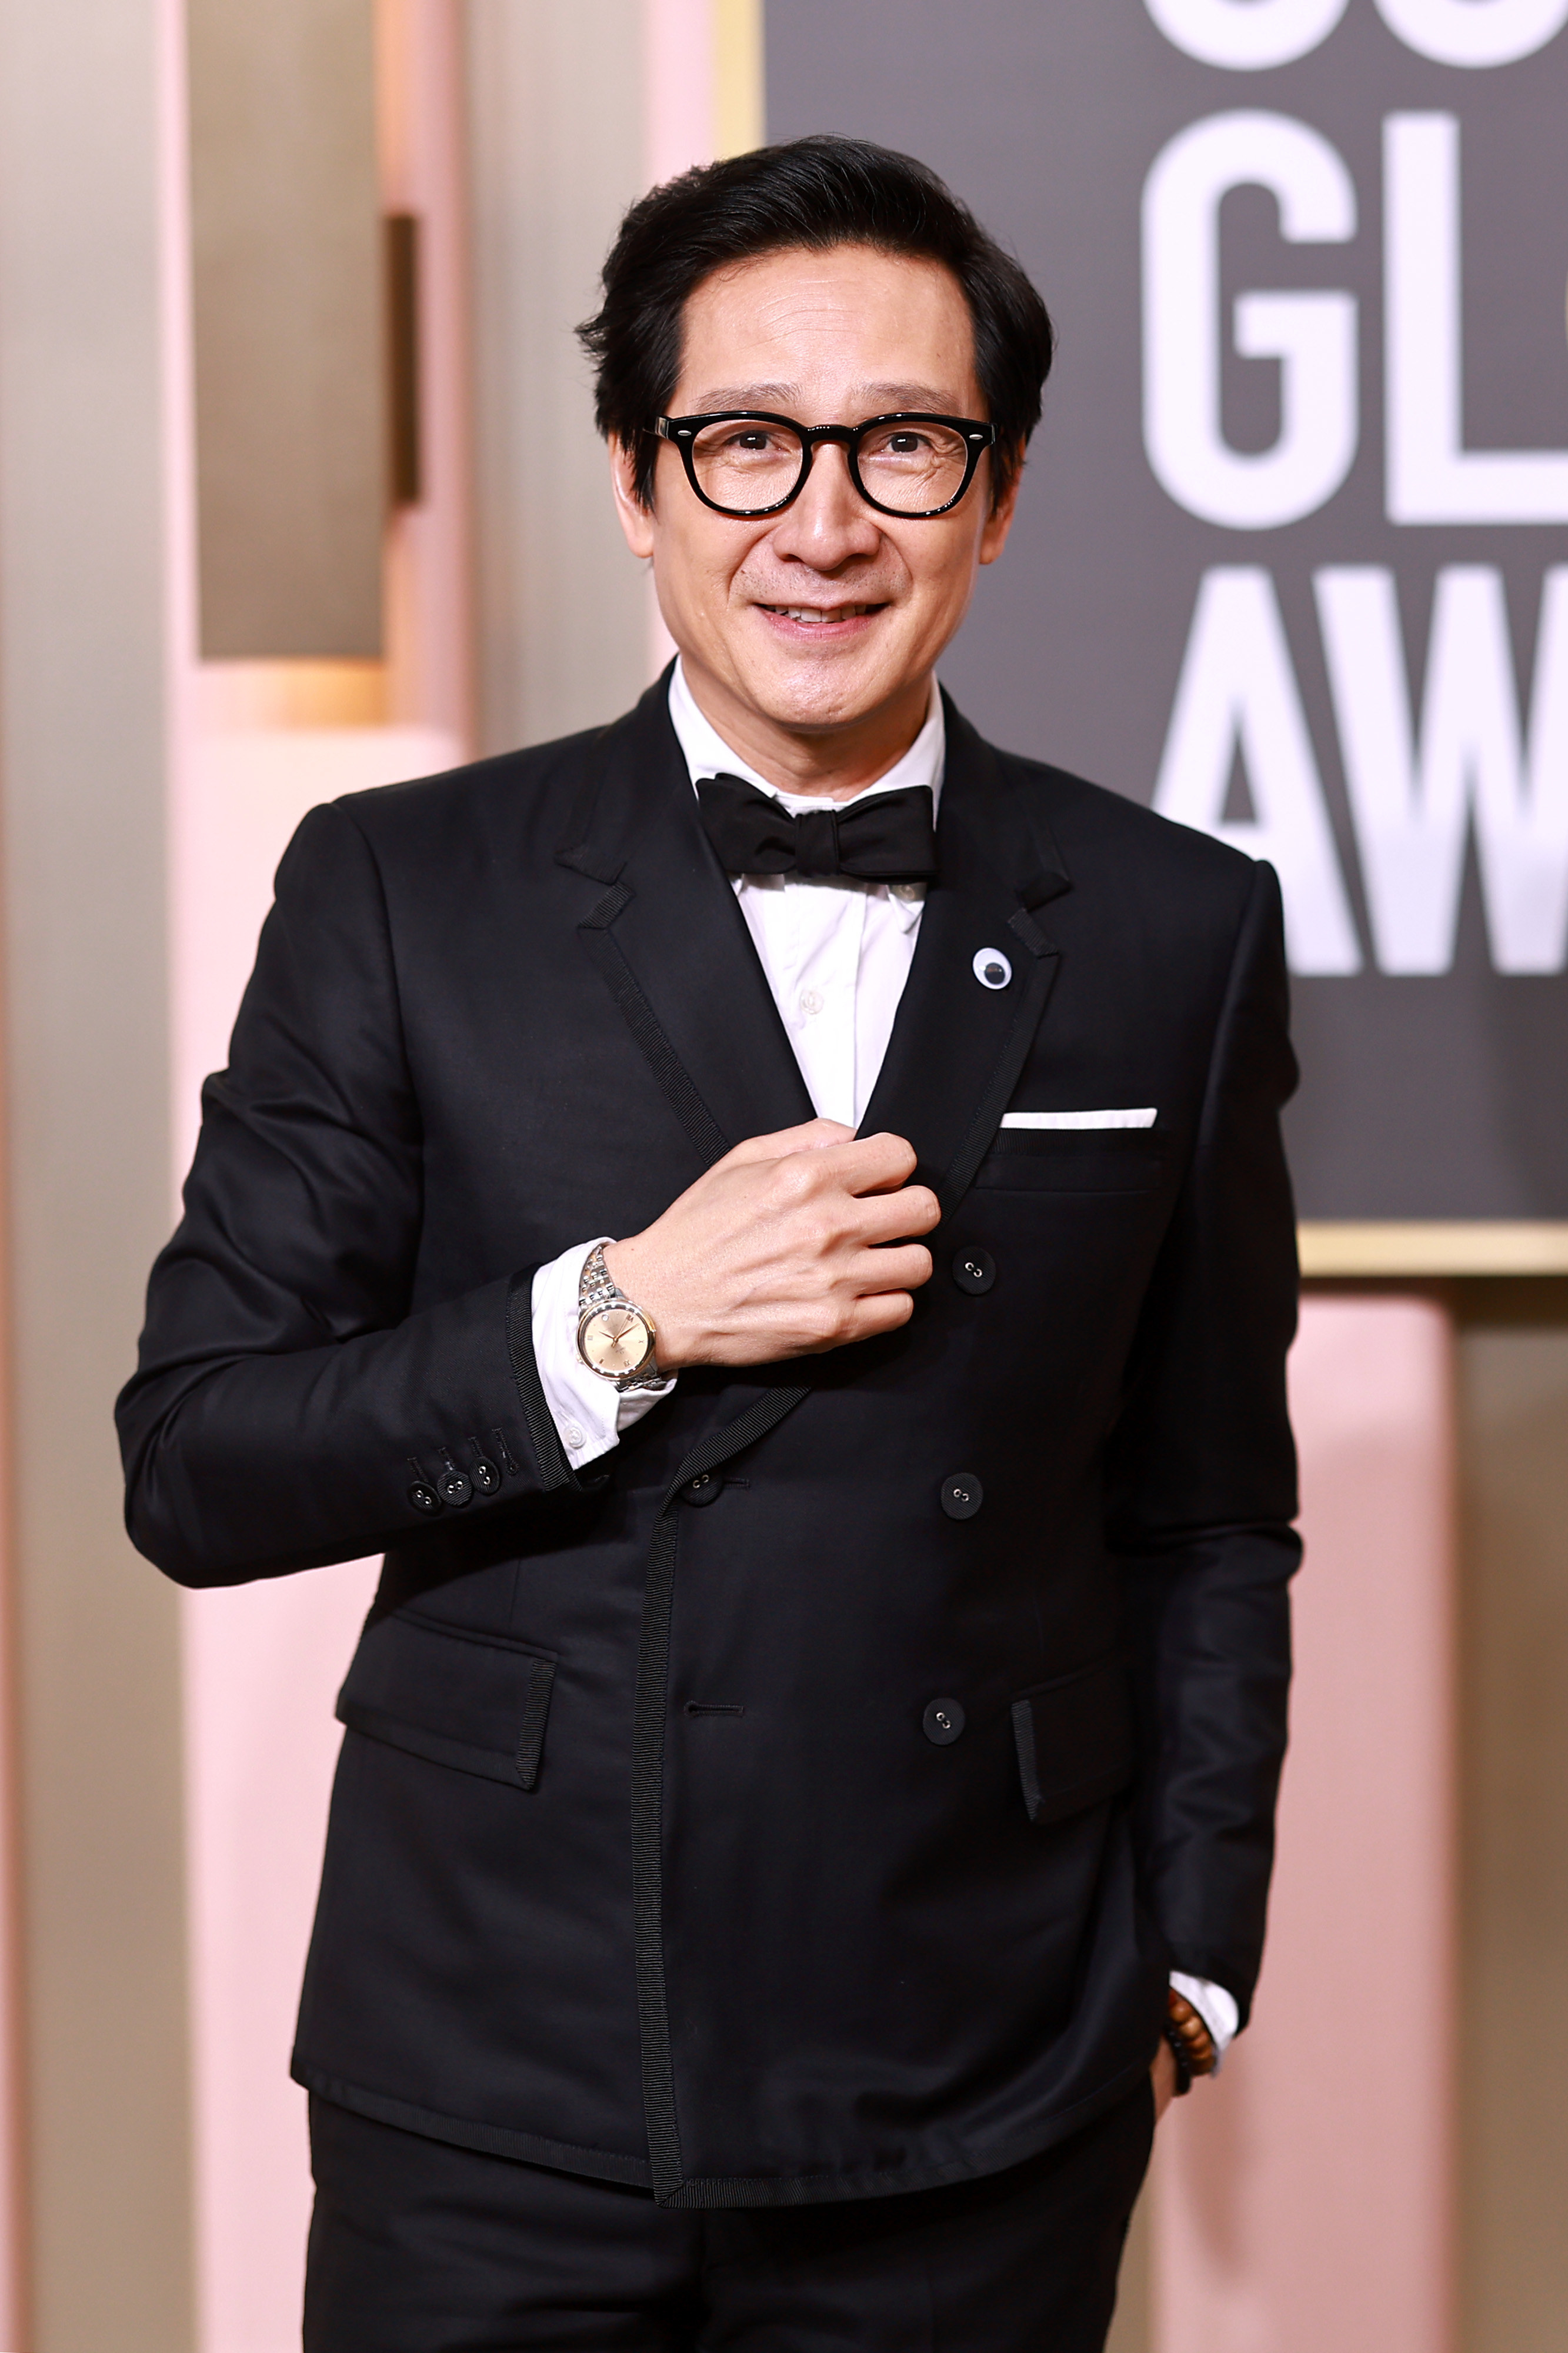 Ke Huy Quan smiles as his photo is taken at an awards show. He&#x27;s wearing a suit and bowtie